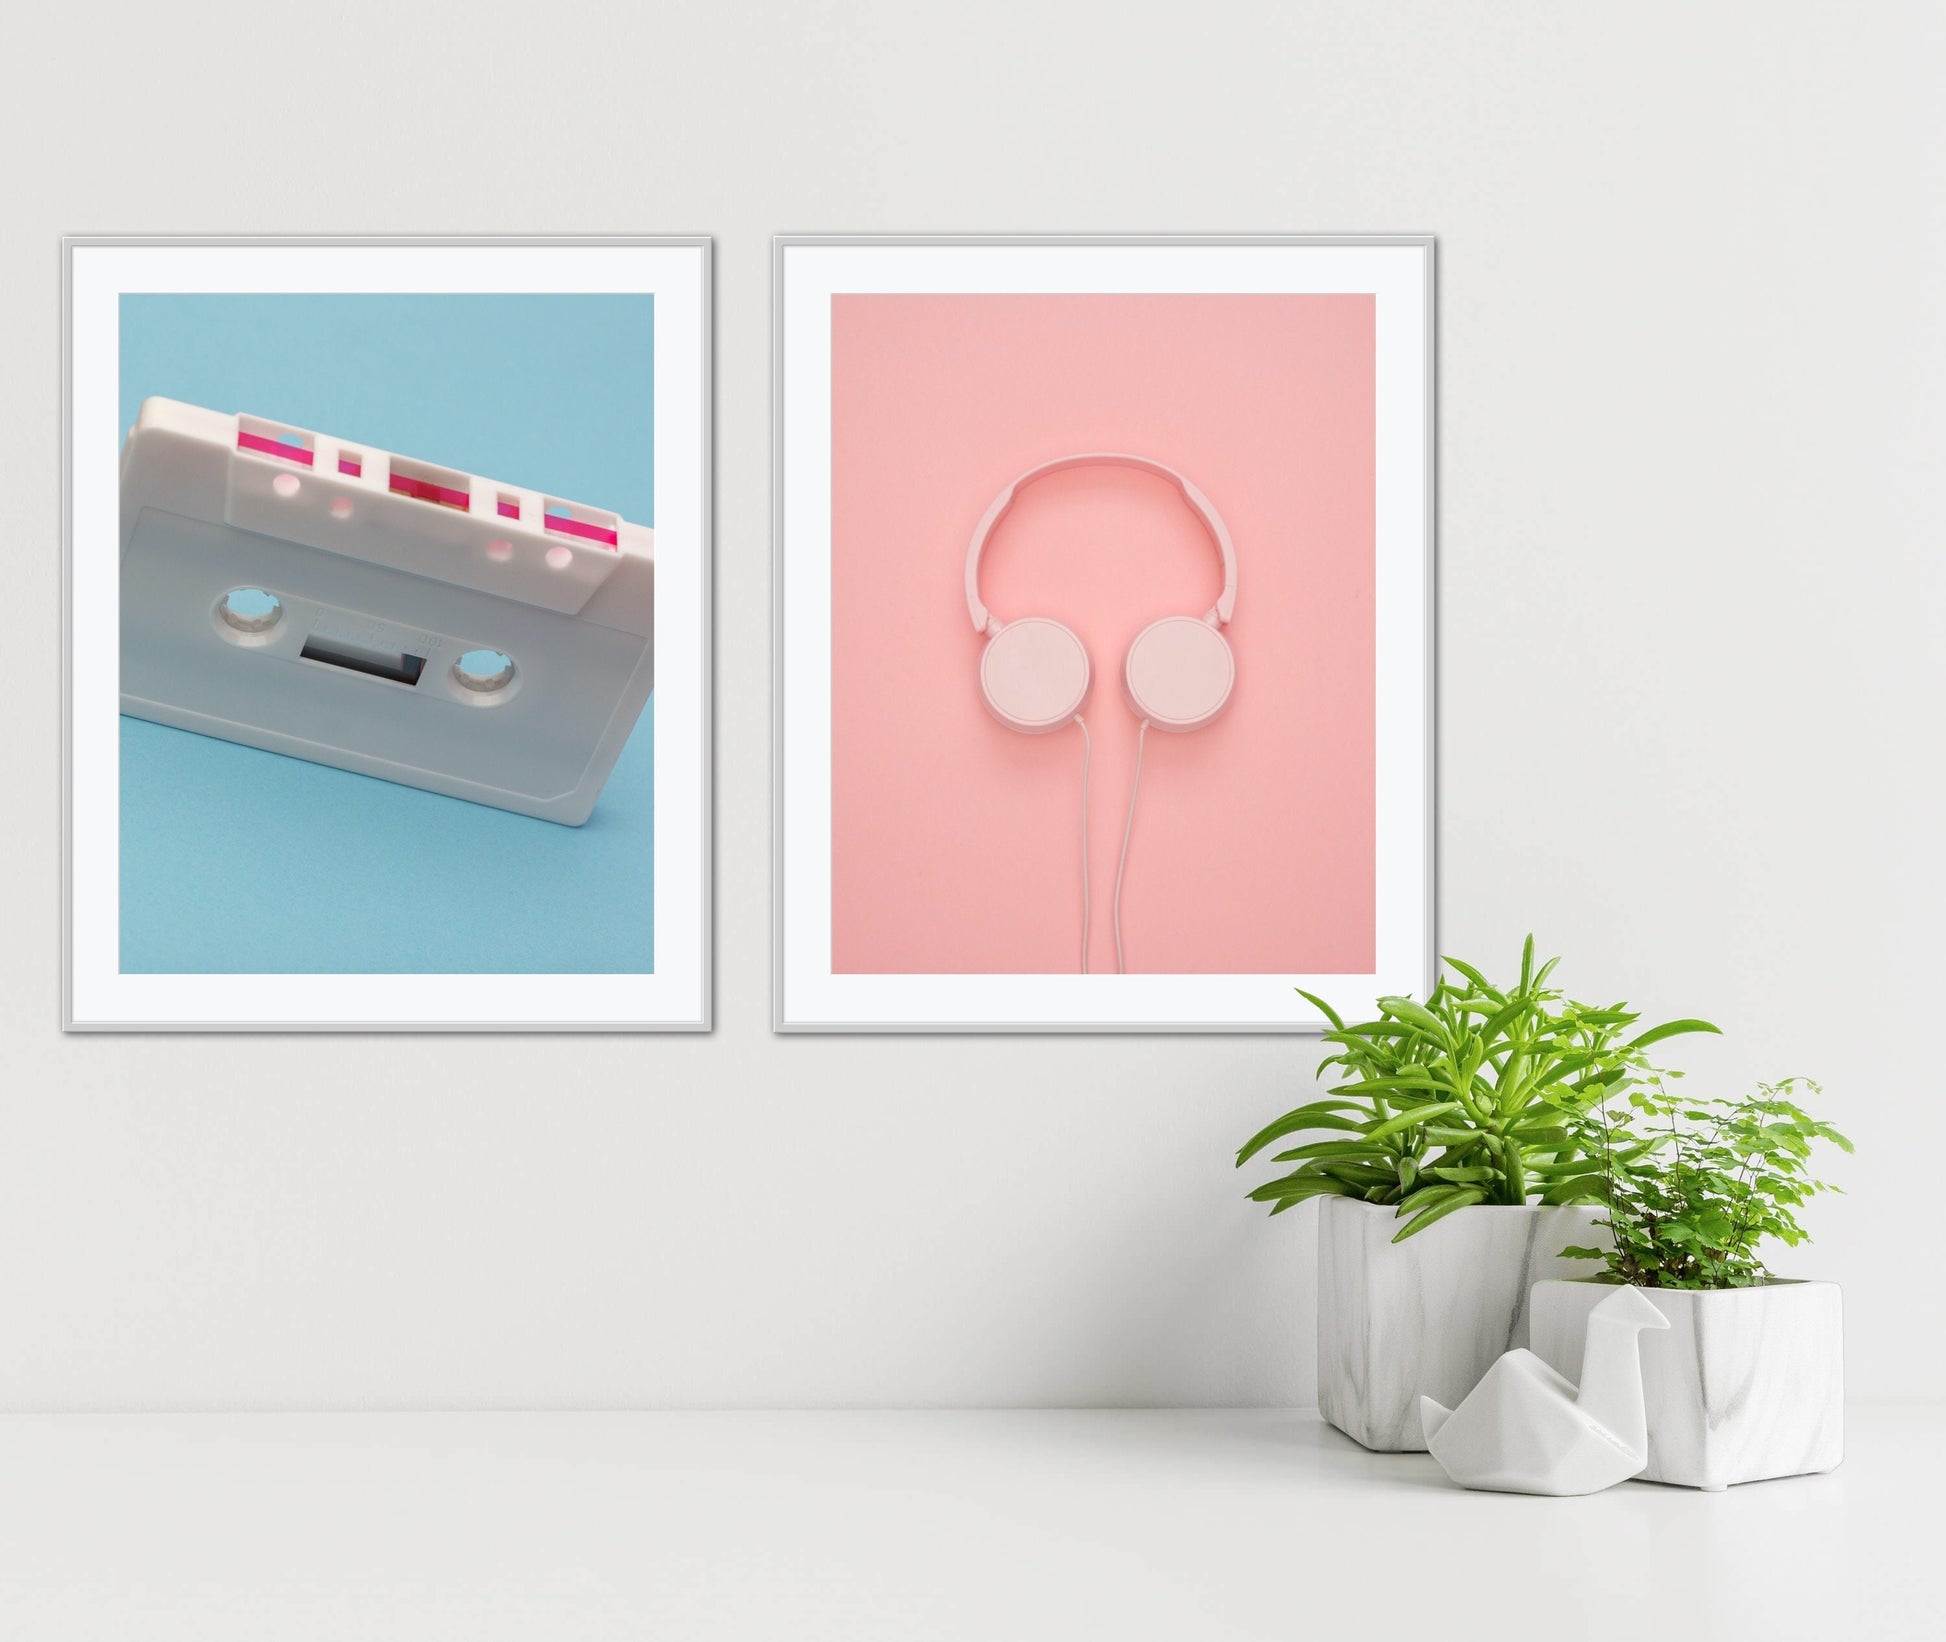 Workout motivation music poster Set of two DIGITAL PRINTS, sports prints, motivational wall art, pink turquoise posters, headphone print